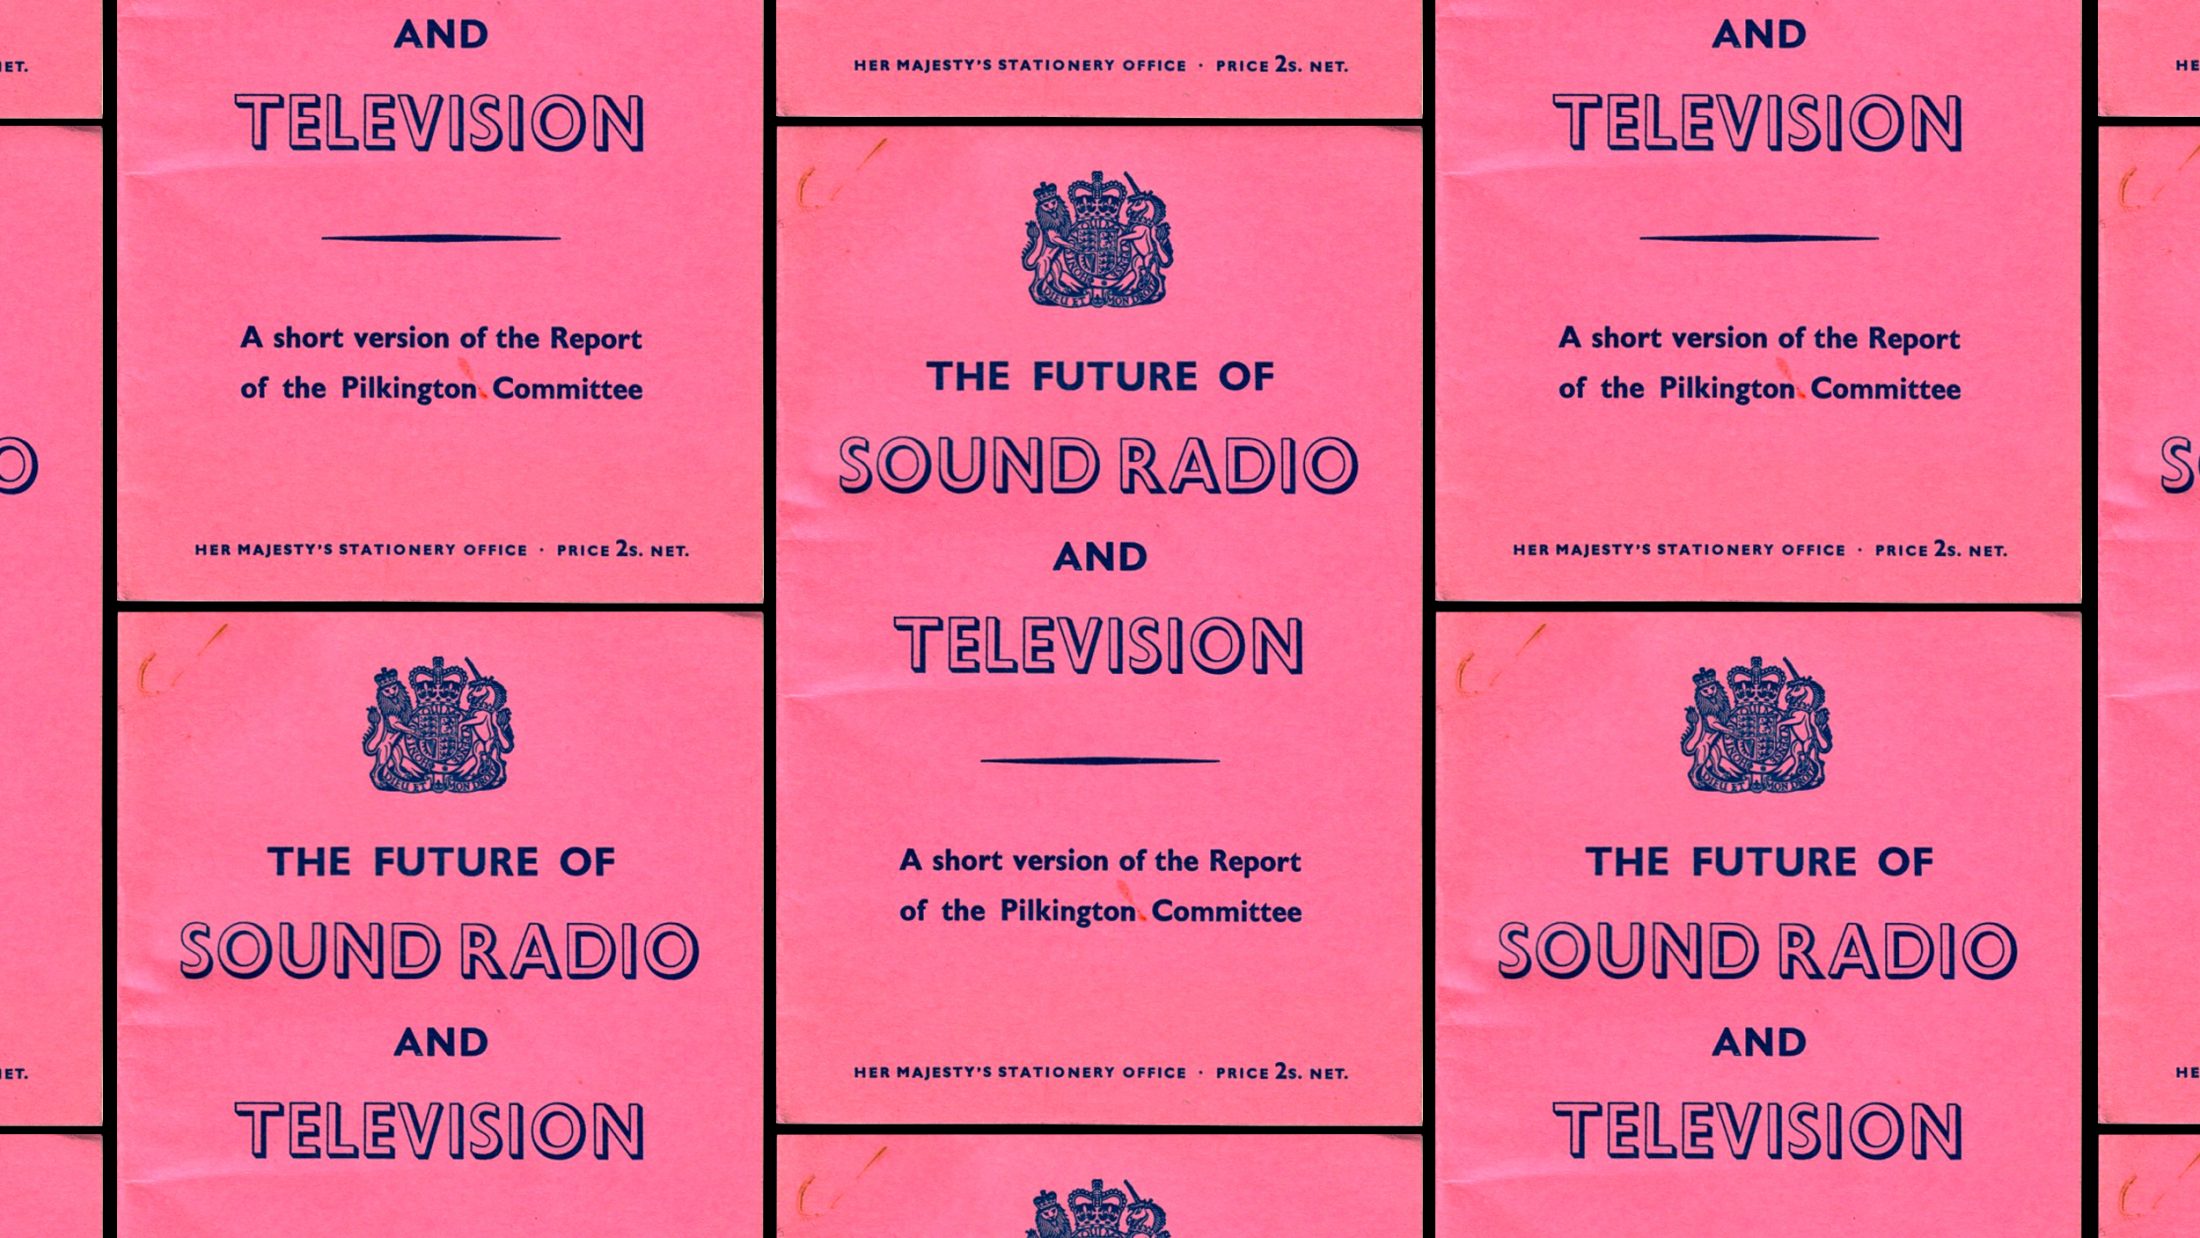 Cover of The Pilkington Report from Her Majesty's Stationery Office circa 1962